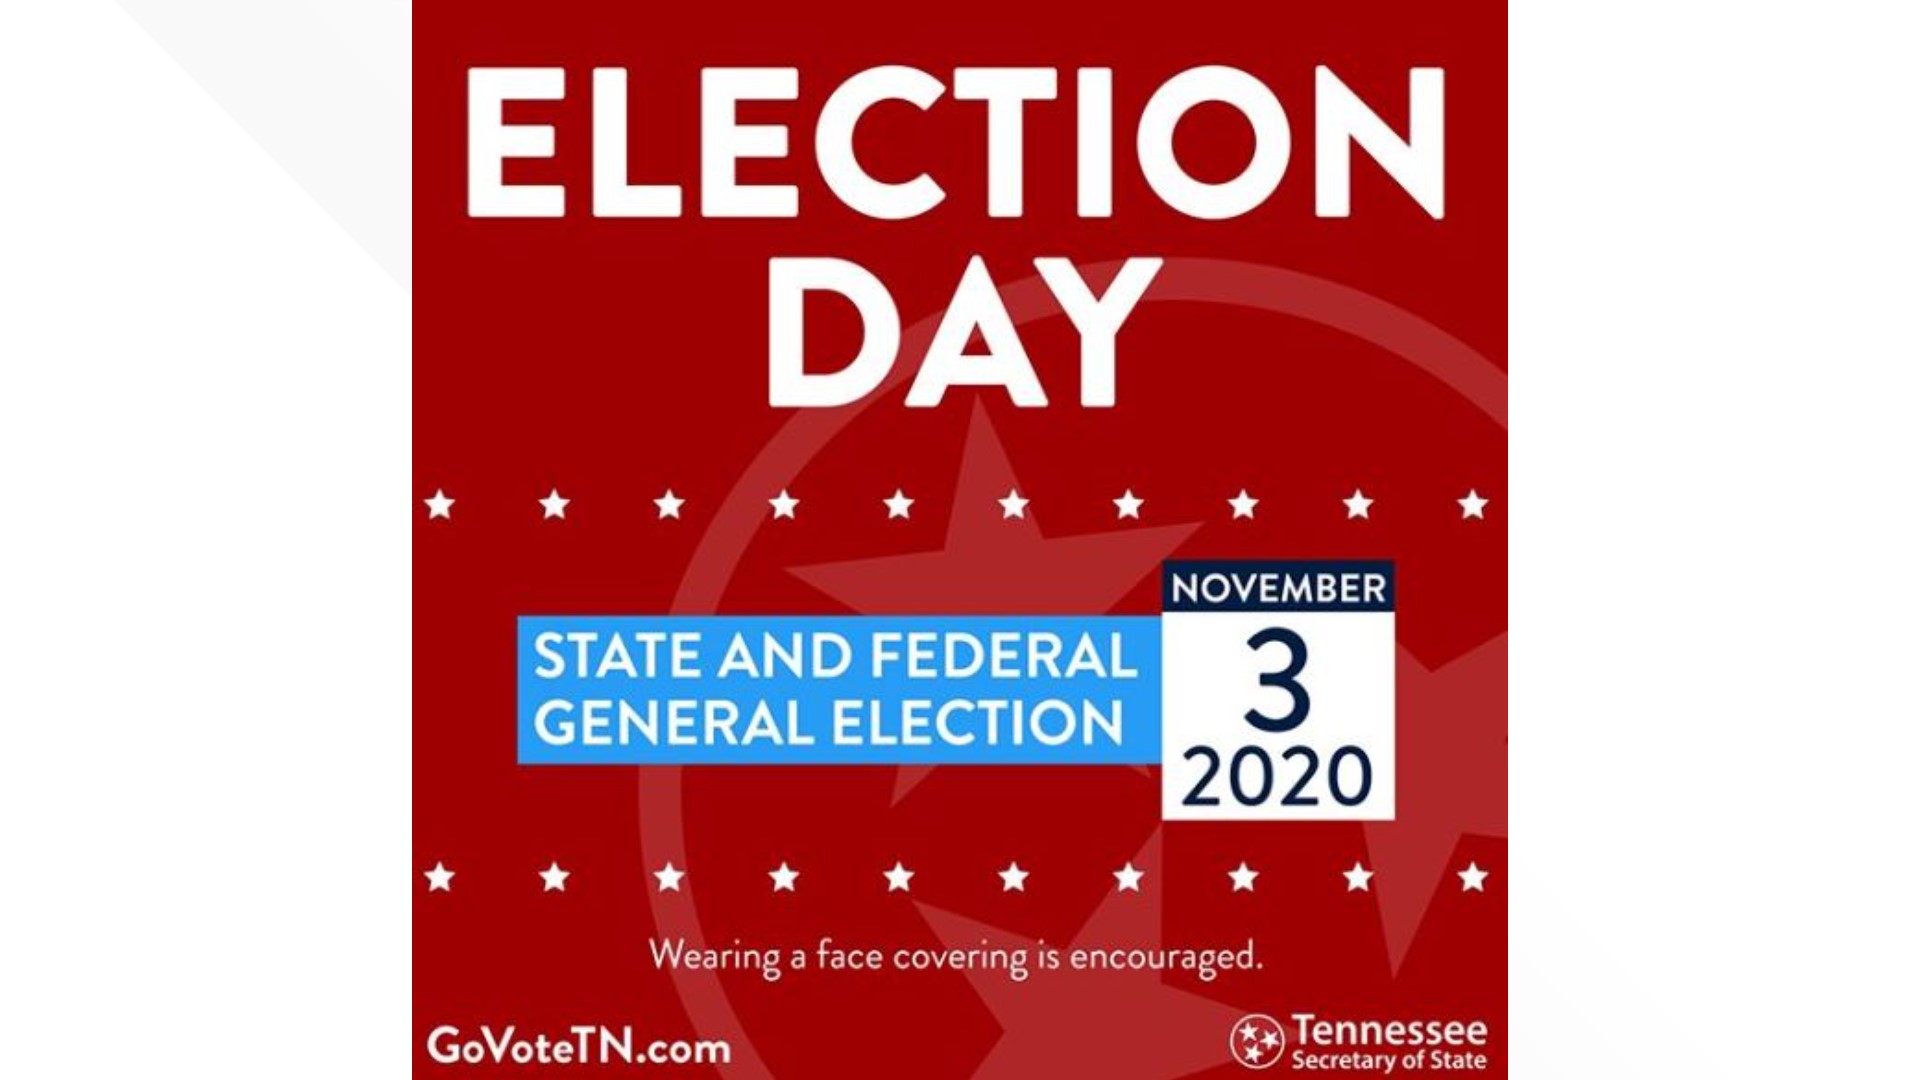 Tennessee Election Day hotline to report fraud or to get answers